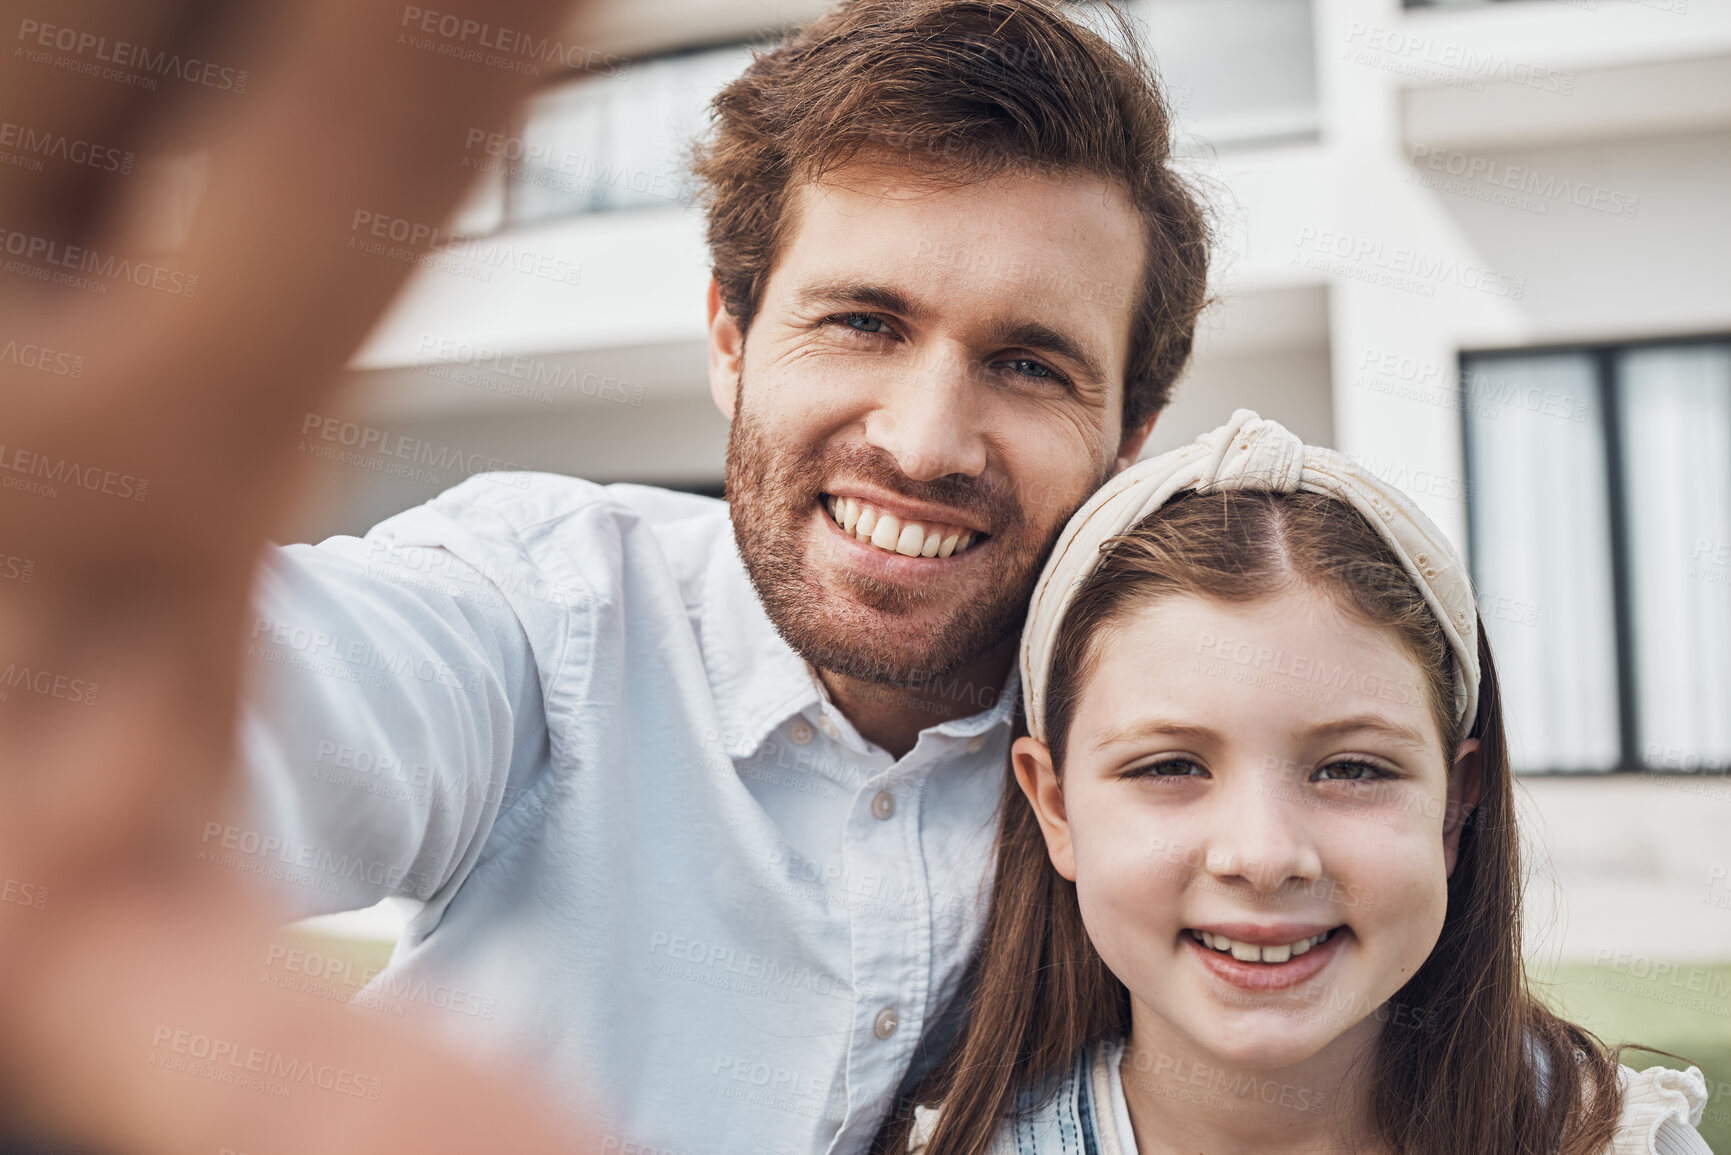 Buy stock photo Relax, father and child love taking a selfie as a happy family in summer holidays in a house or backyard. Smile, memory or young girl smiles in a picture with a single parent or dad while bonding 